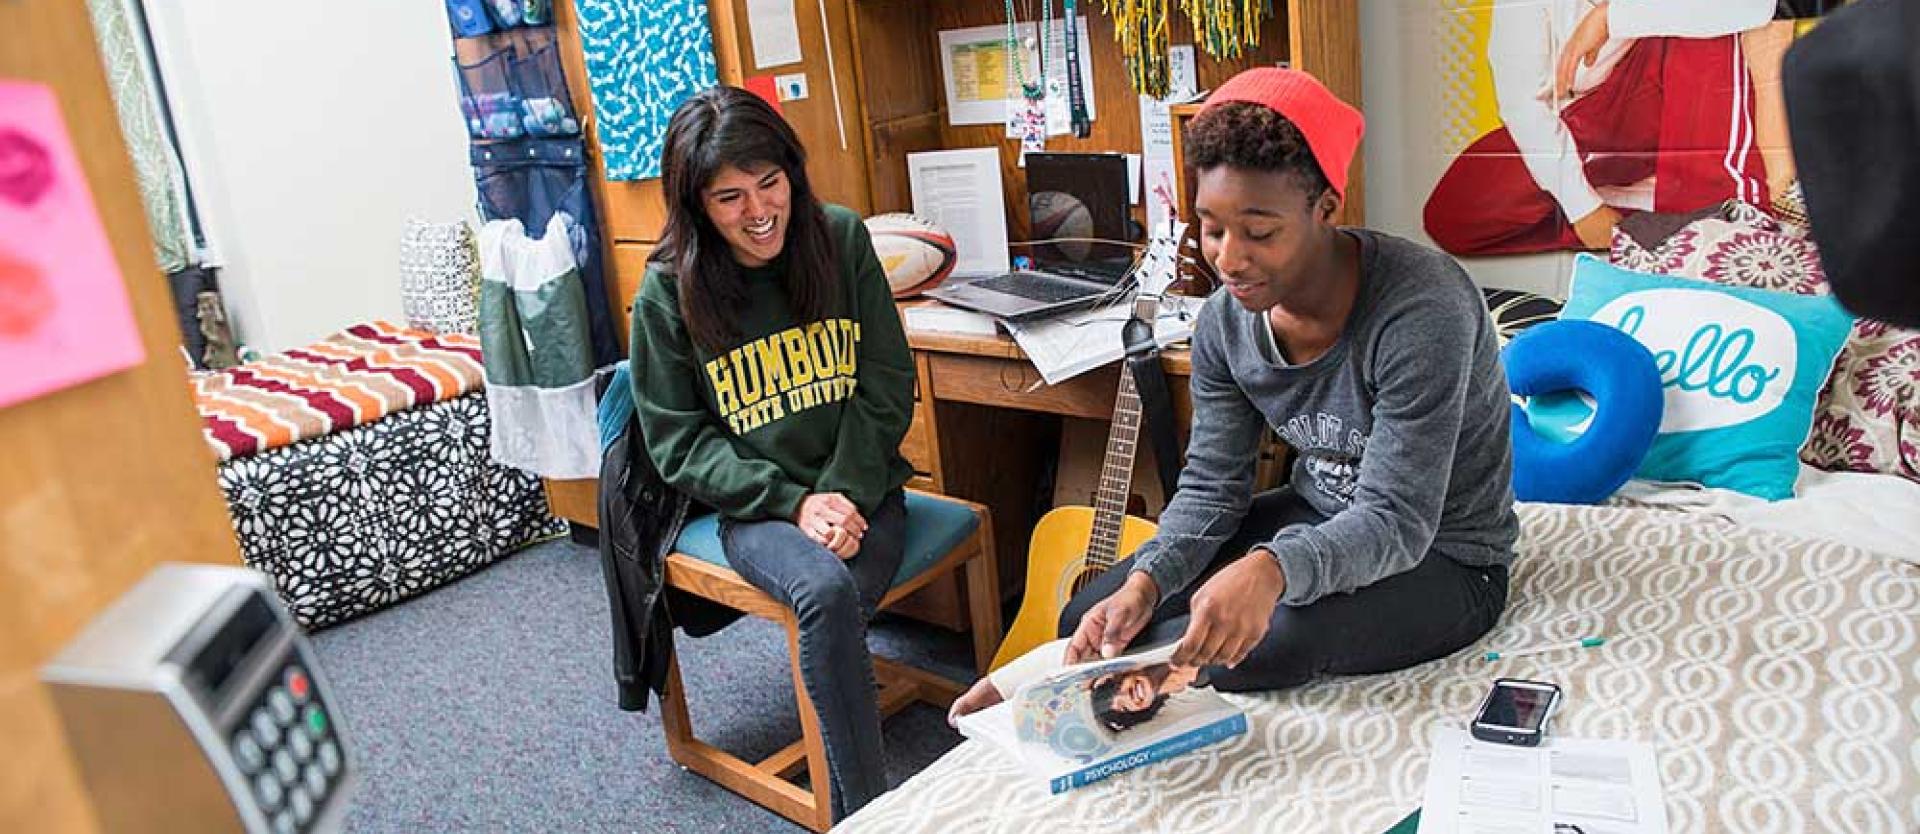 Students studying in Cypress residence hall.